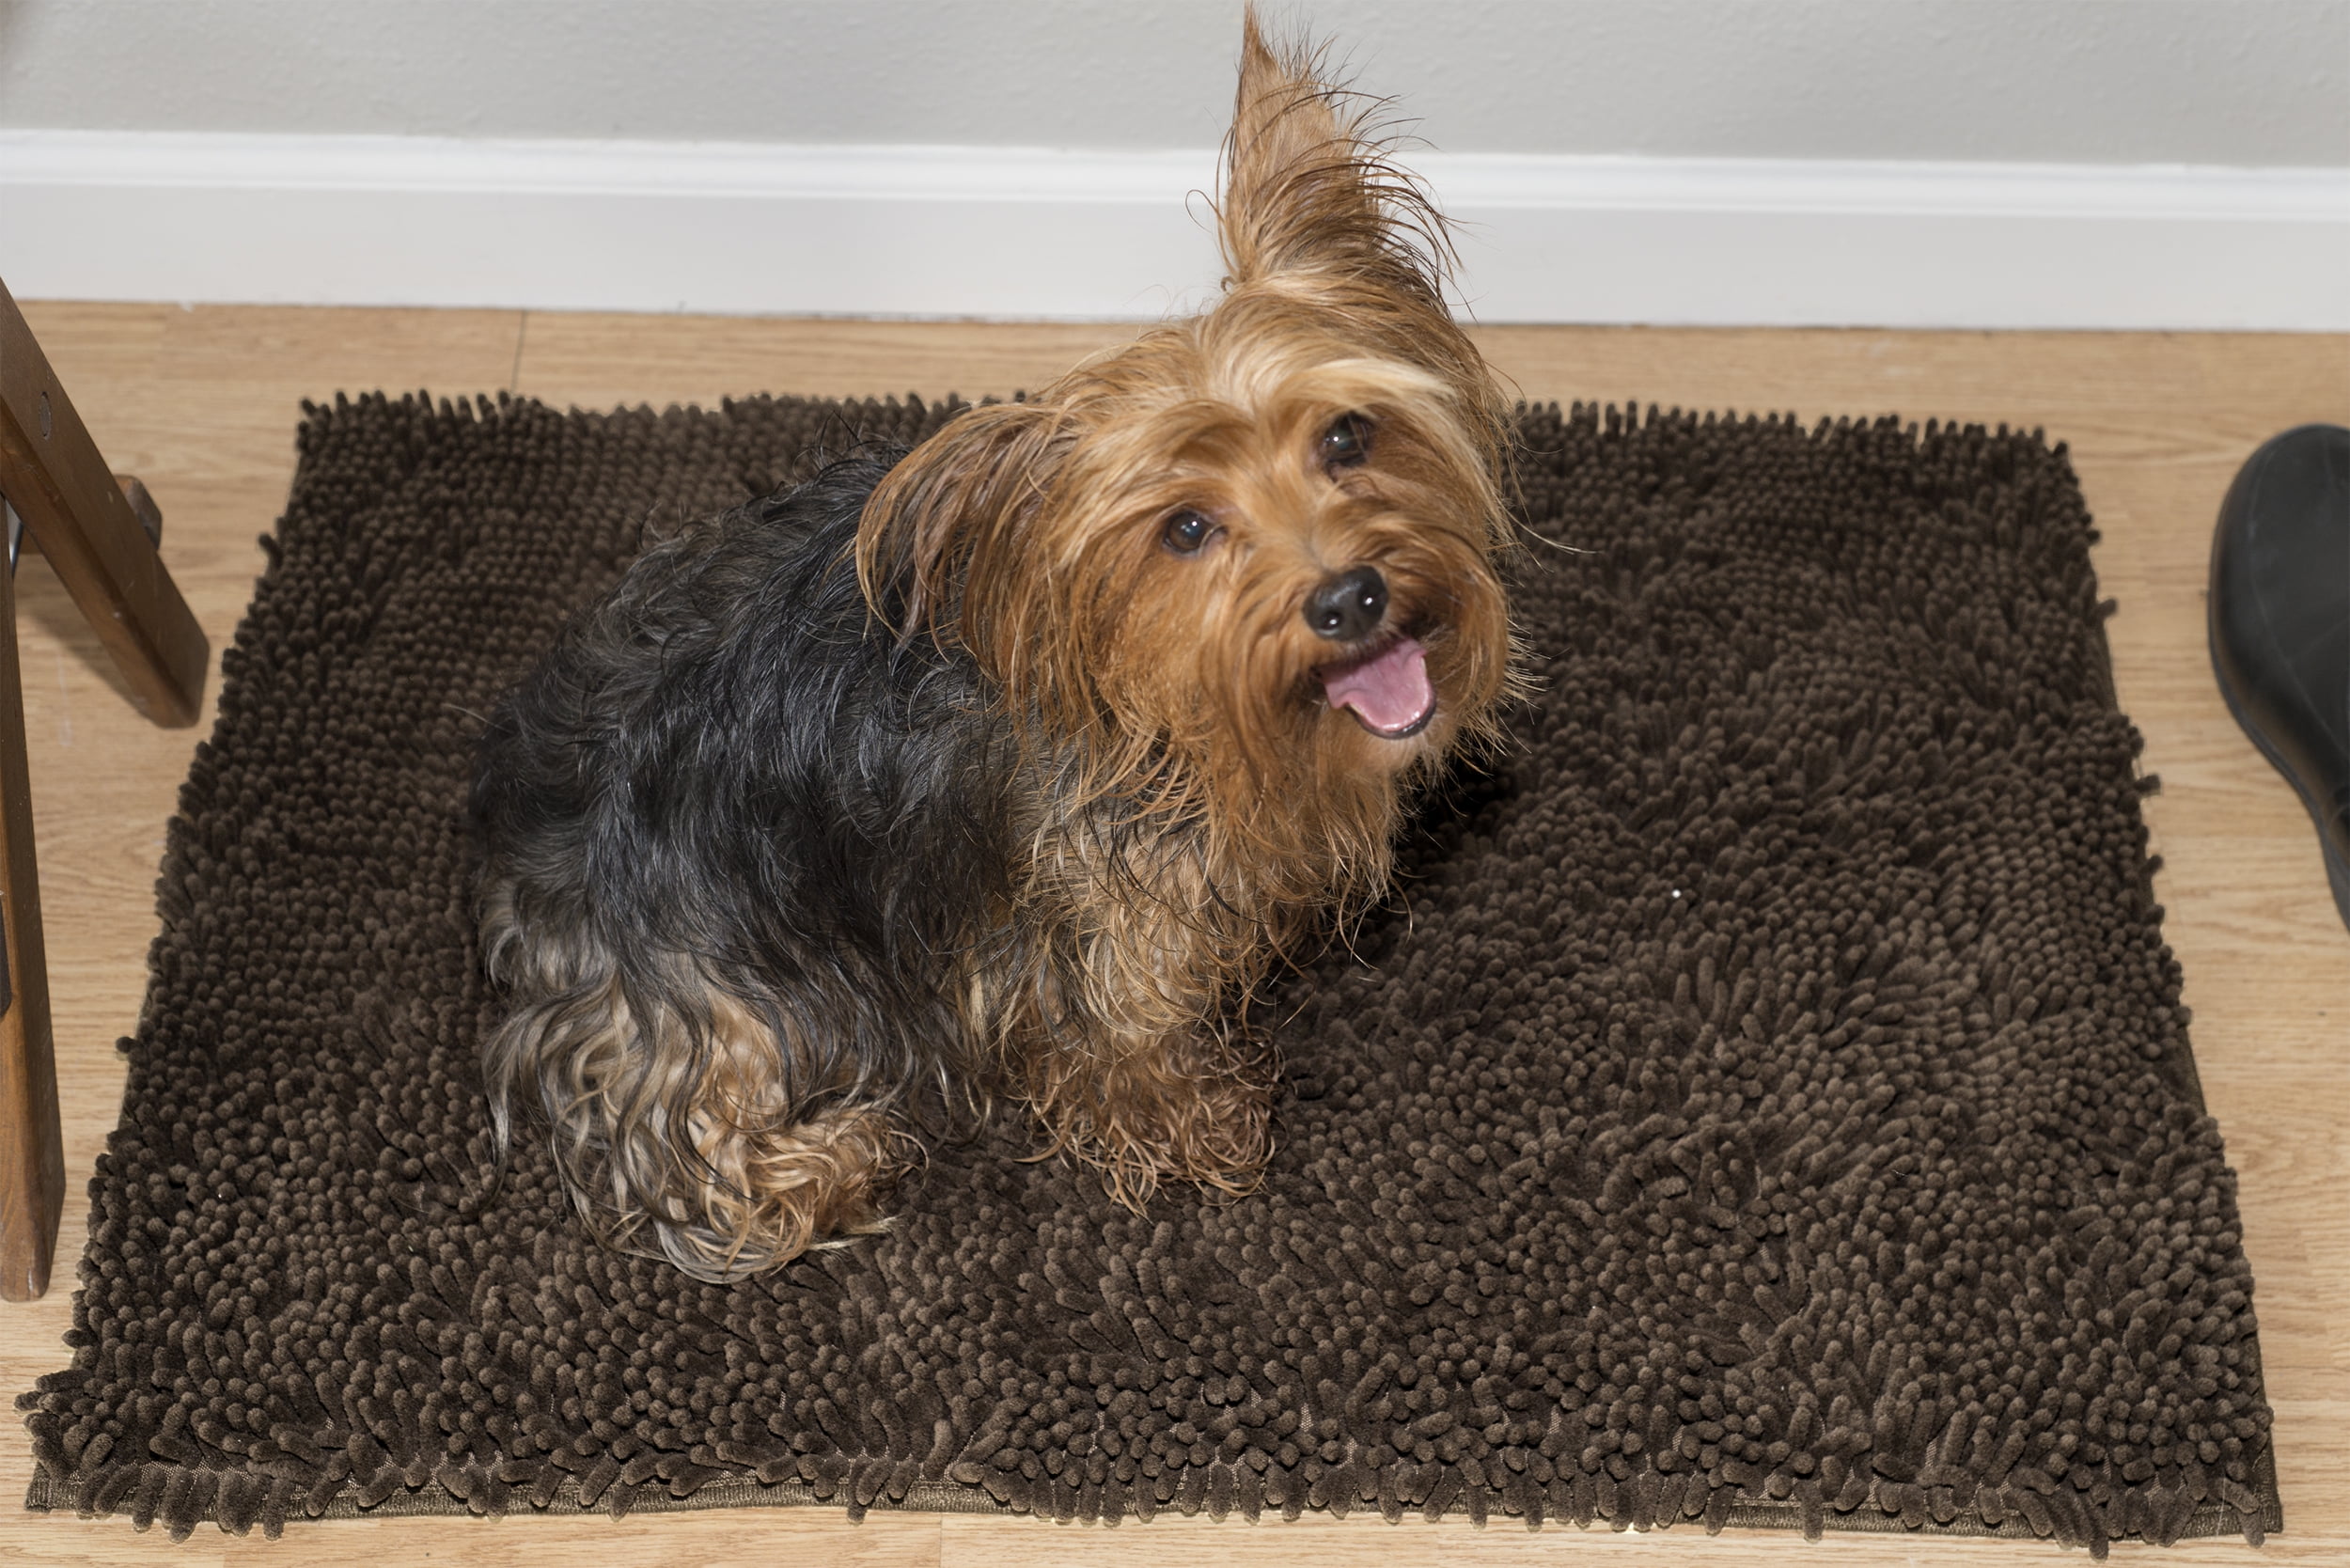 Tackling Messy Paws with Absorbent Mud Rugs and Mats for Dogs - Miracle Mat